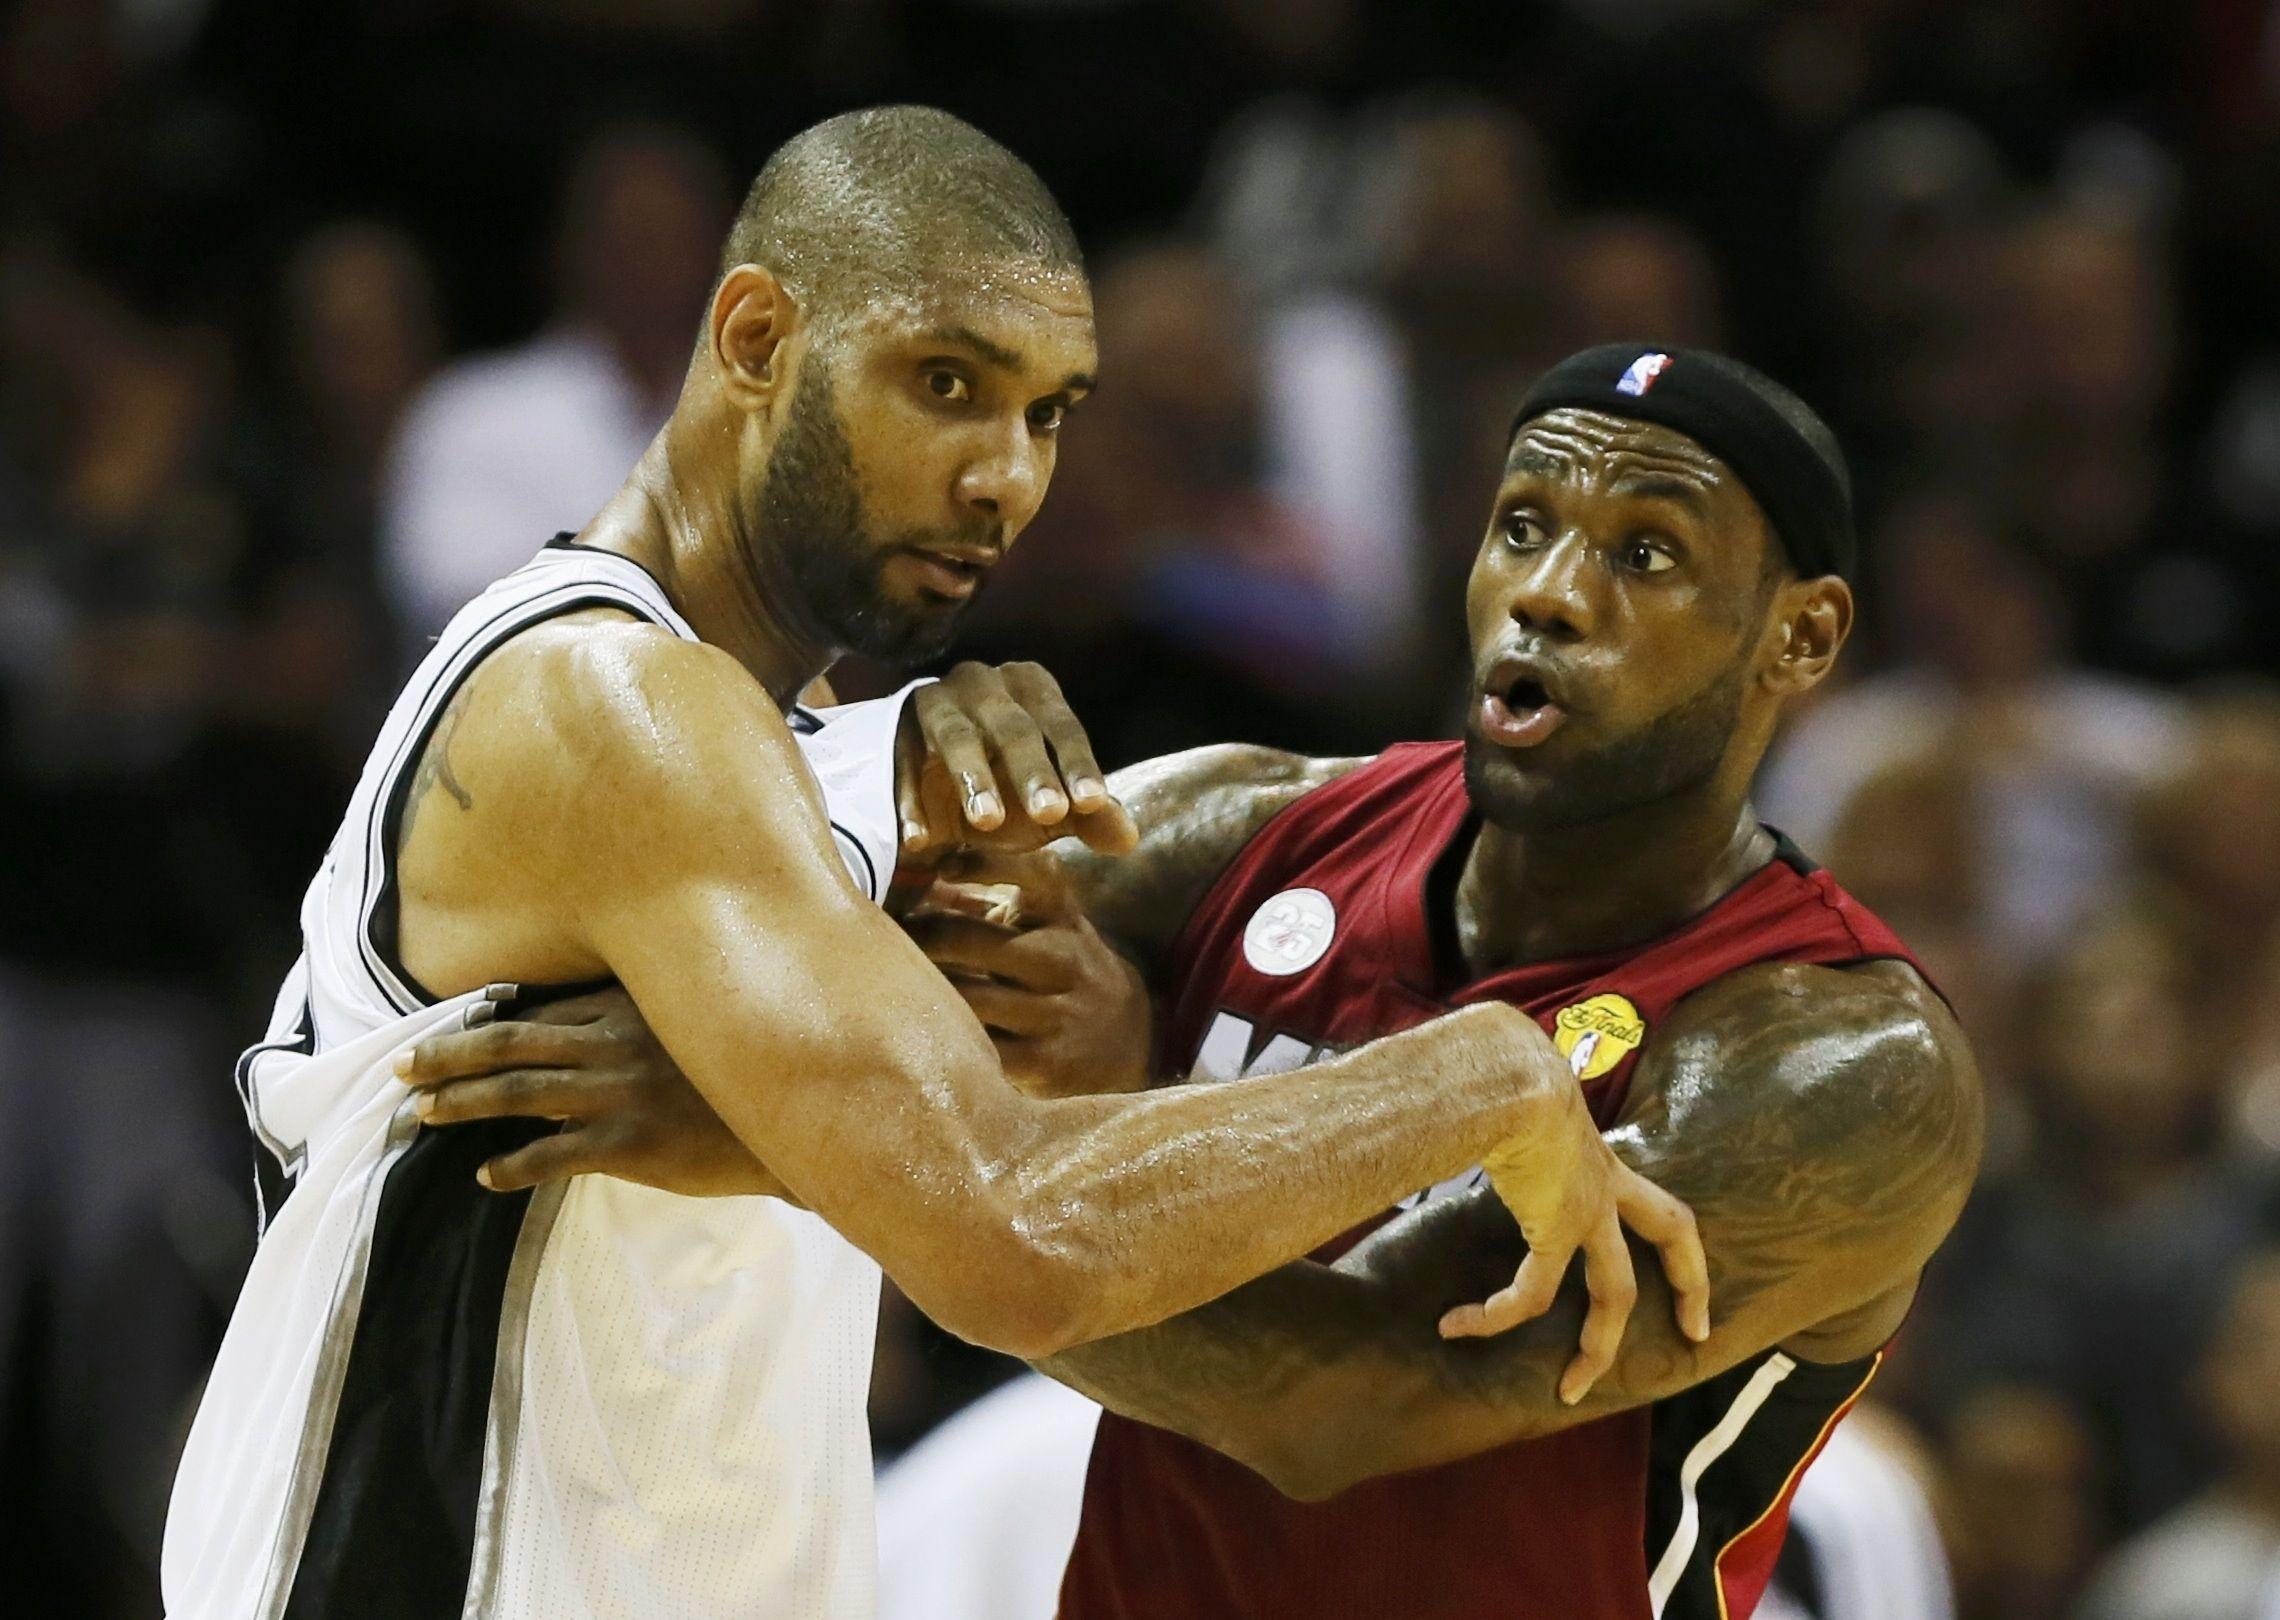 LeBron James Says There&;s No Rivalry With the San Antonio Spurs